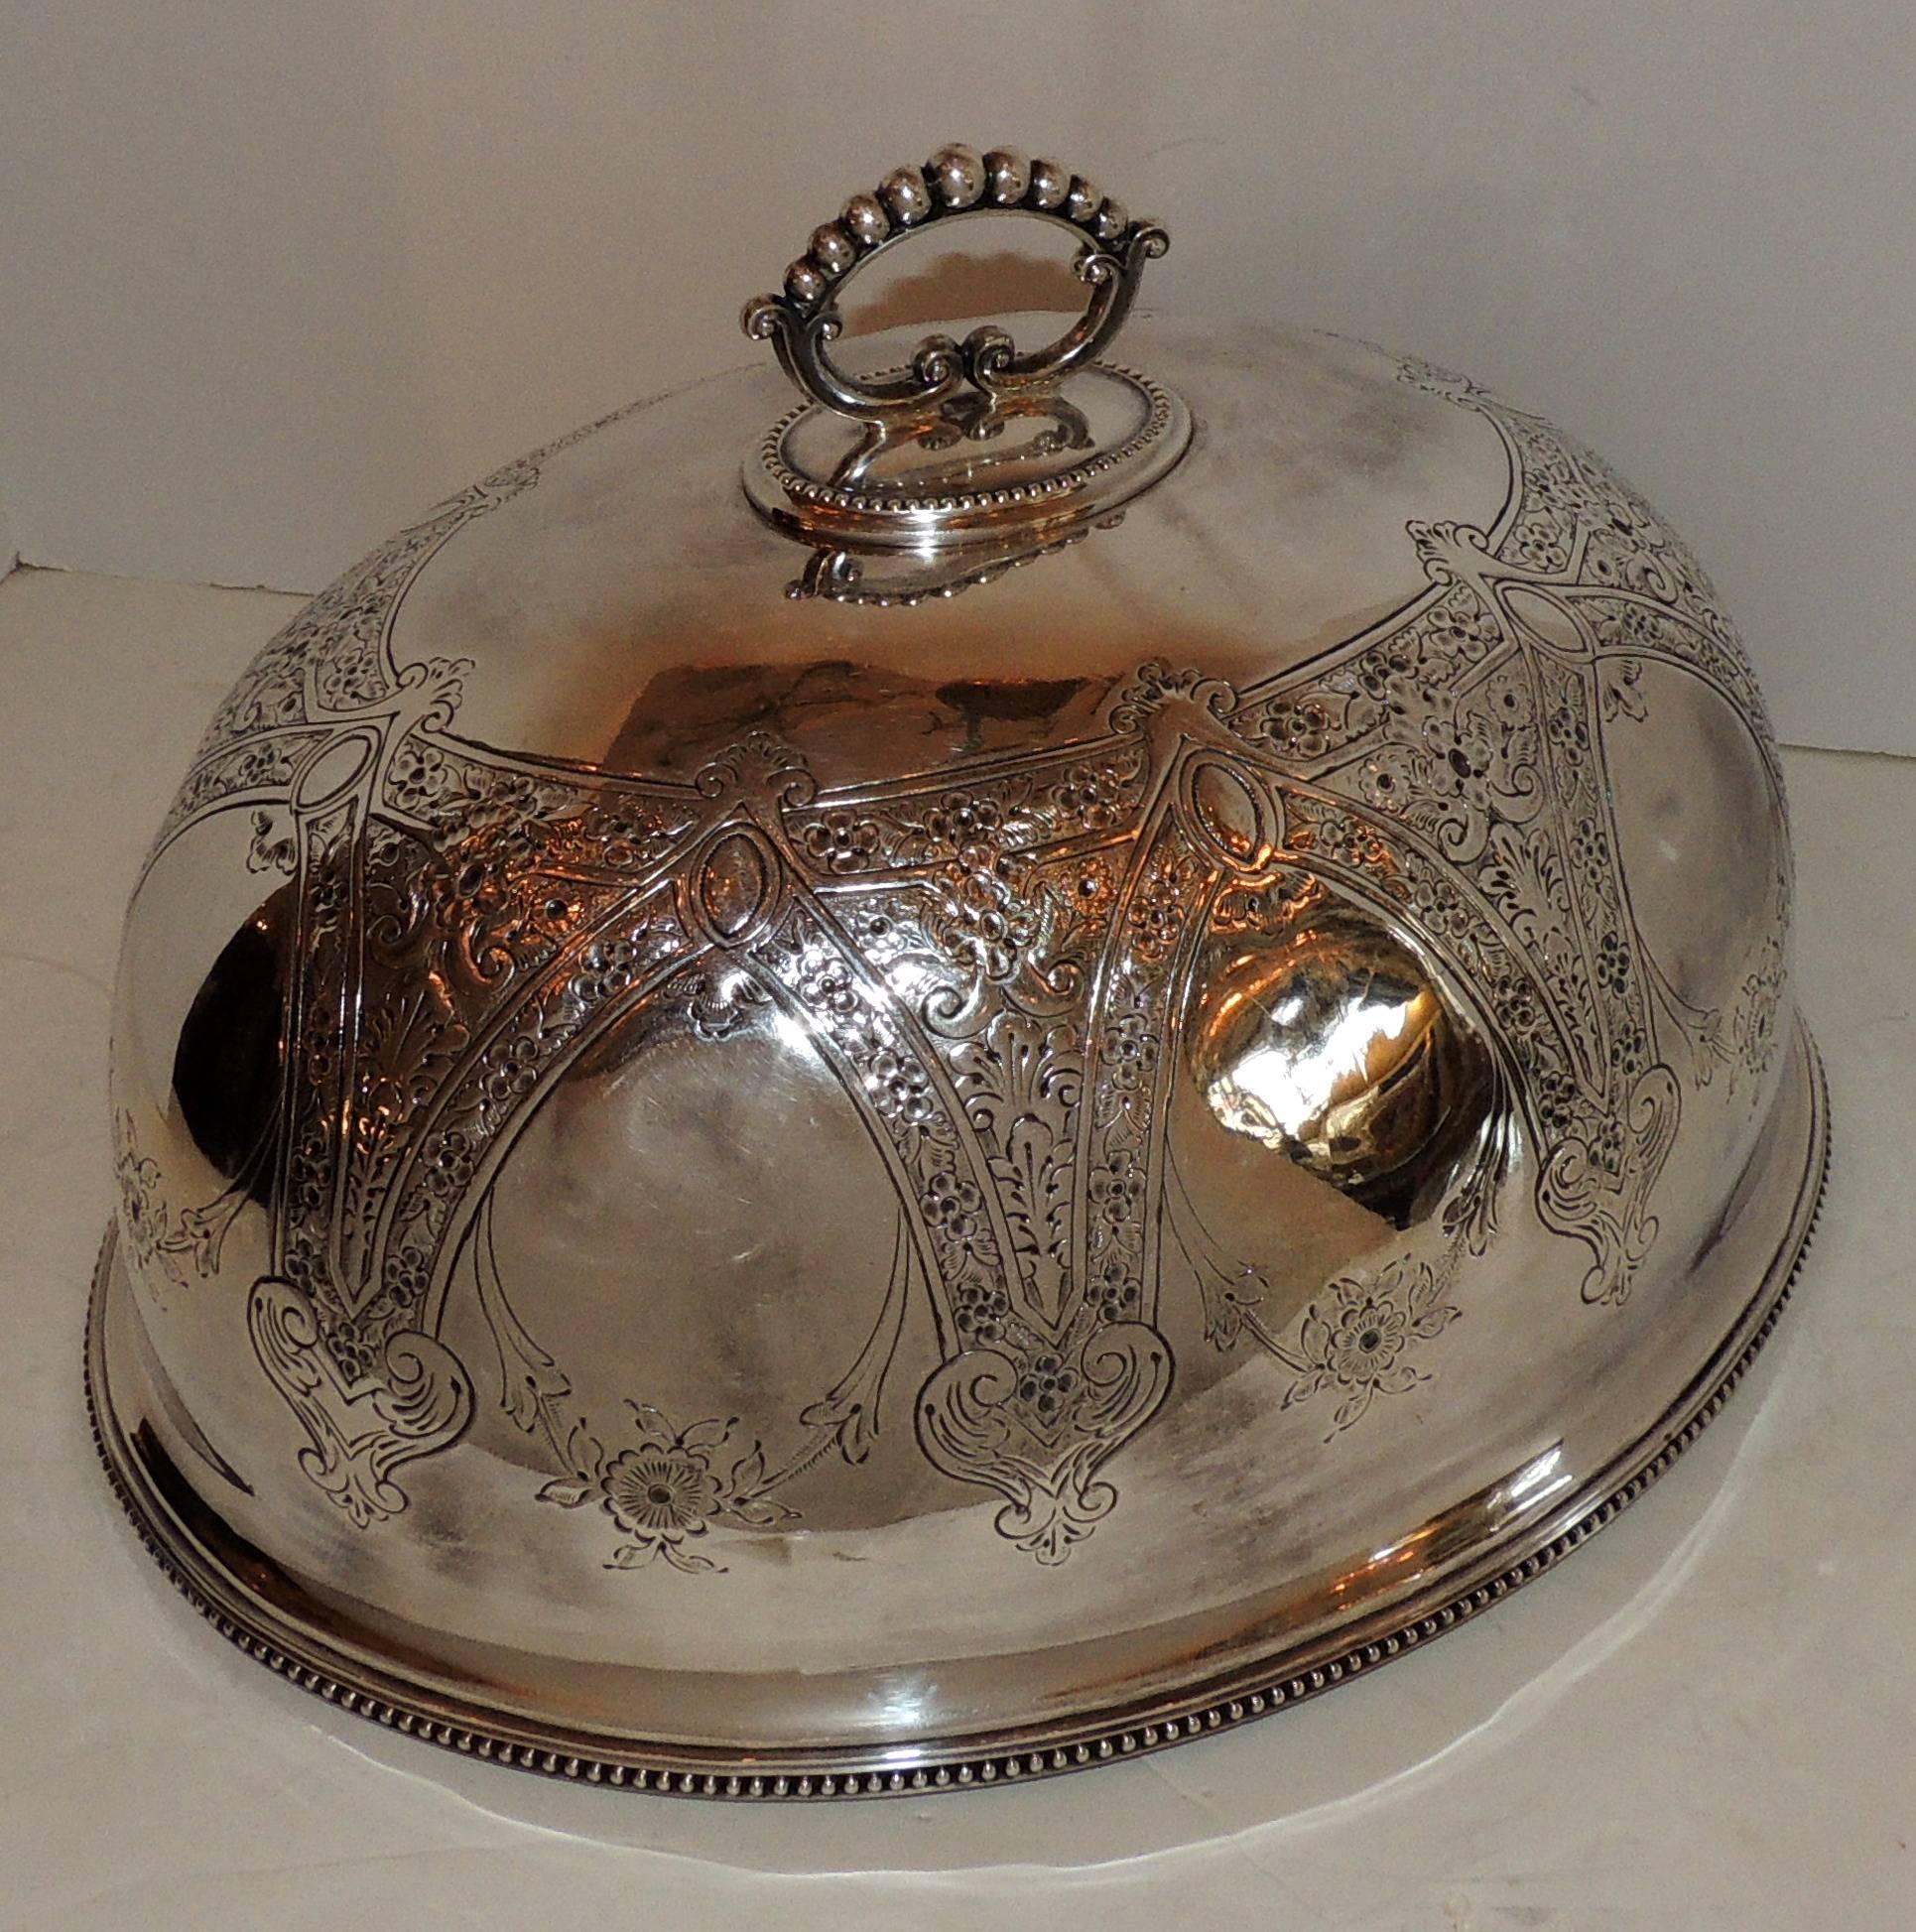 English Antique Silver Plated Meat Food Turkey Dome Cover Victorian Cloche Large Serving